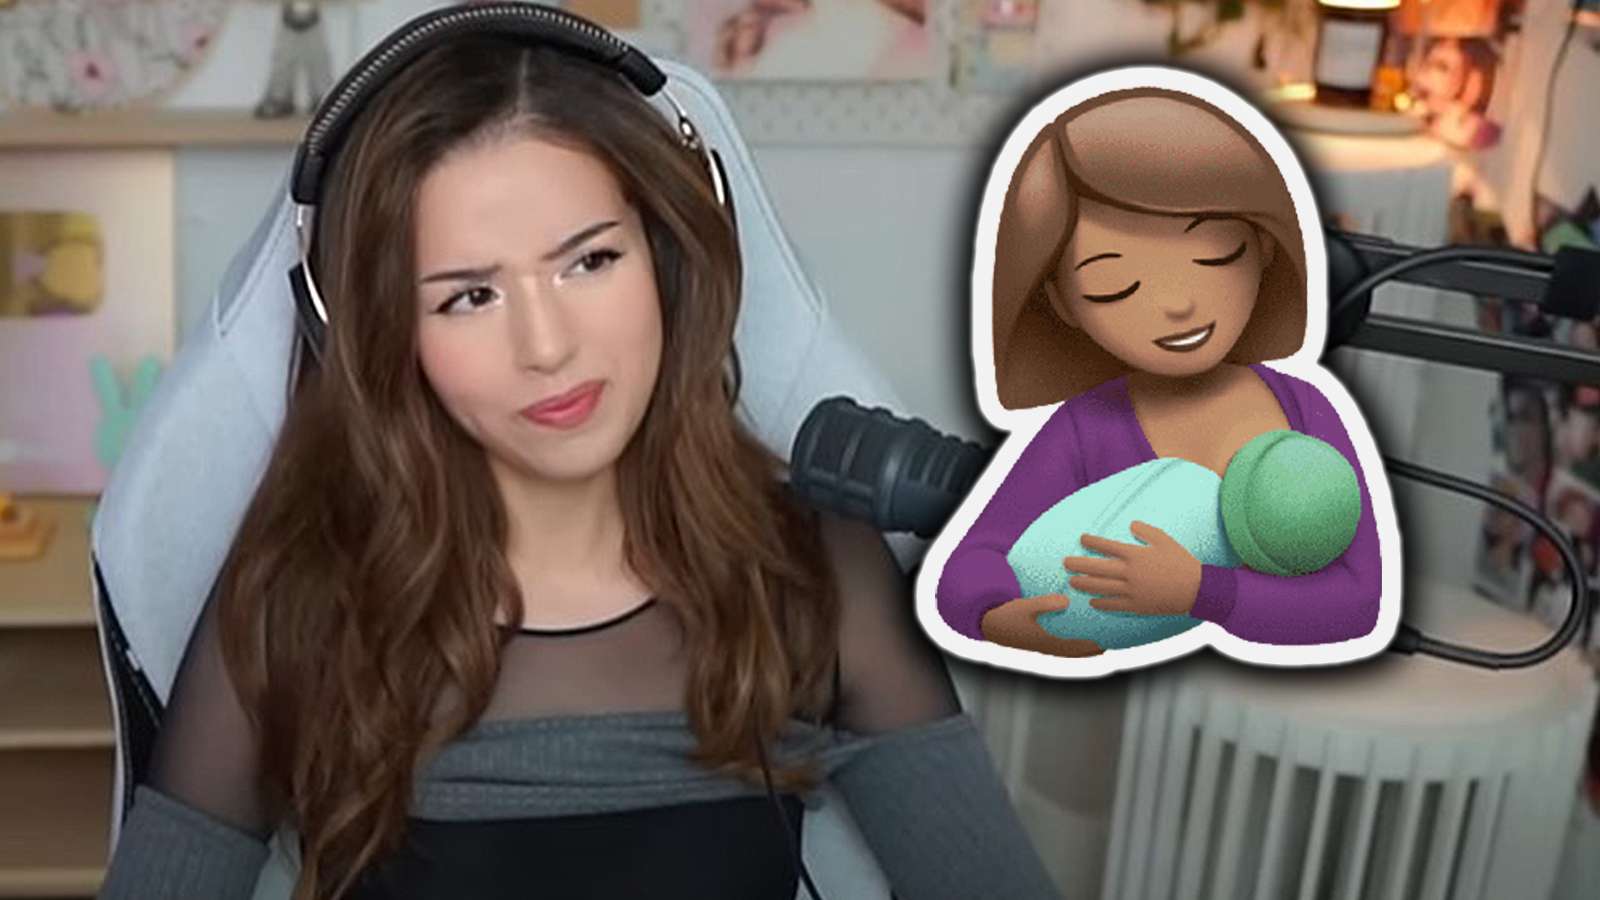 Pokimane flabbergasted by viewers asking if she's pregnant